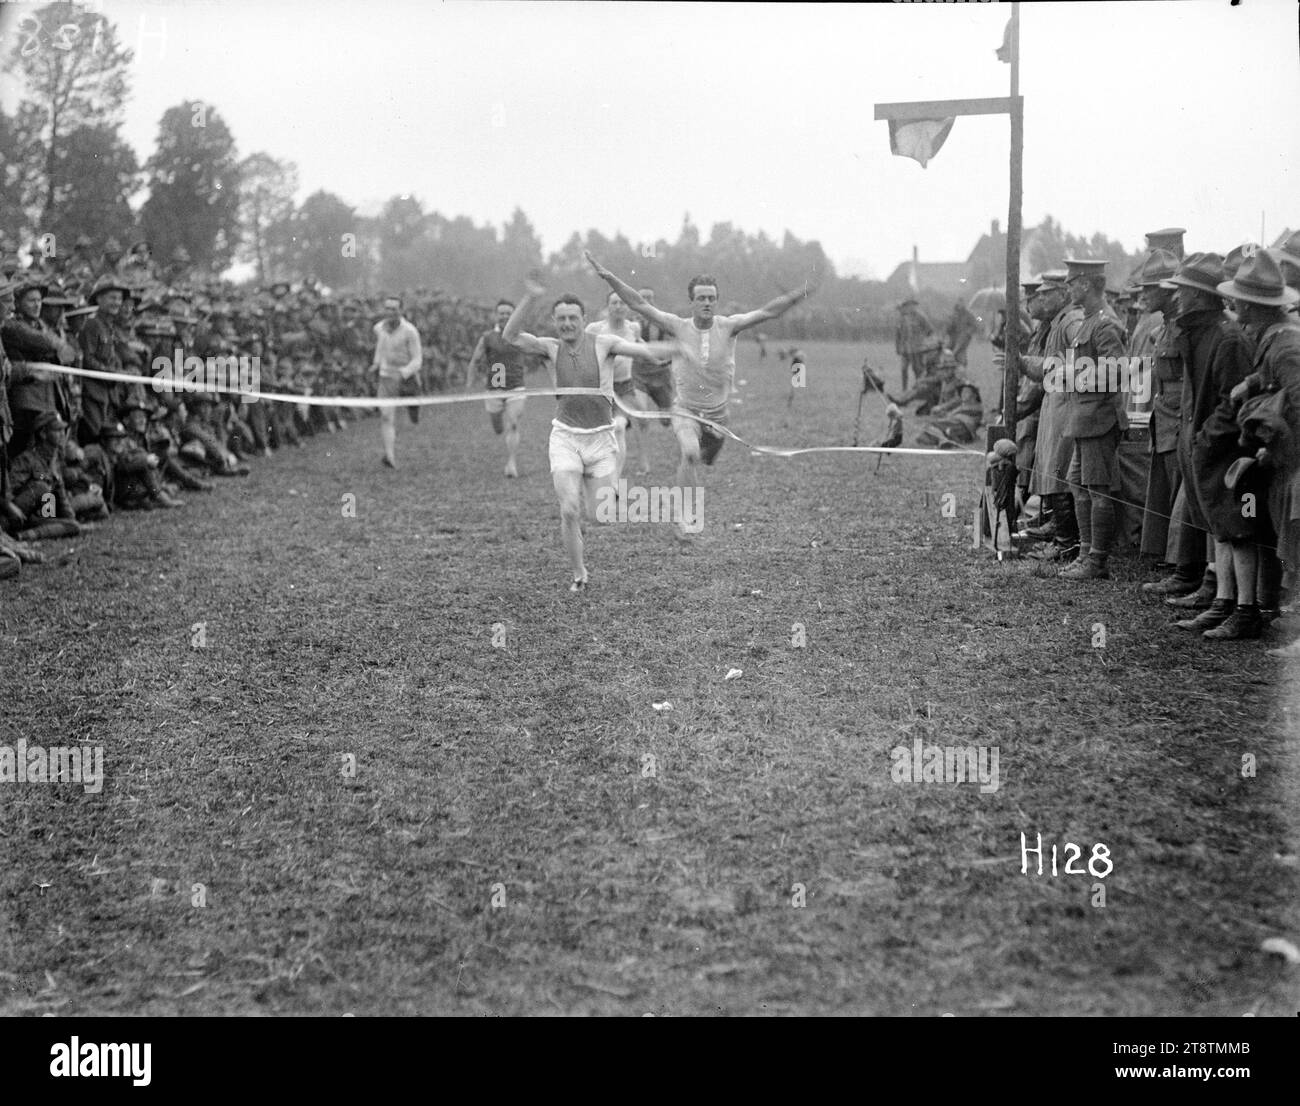 Running race at a New Zealand contingent sports day in Le Doulieu, France, during World War I, Running race at a New Zealand contingent sports day, at Le Doulieu, France, during World War I. Photograph taken on the 8th of July 1917 Stock Photo